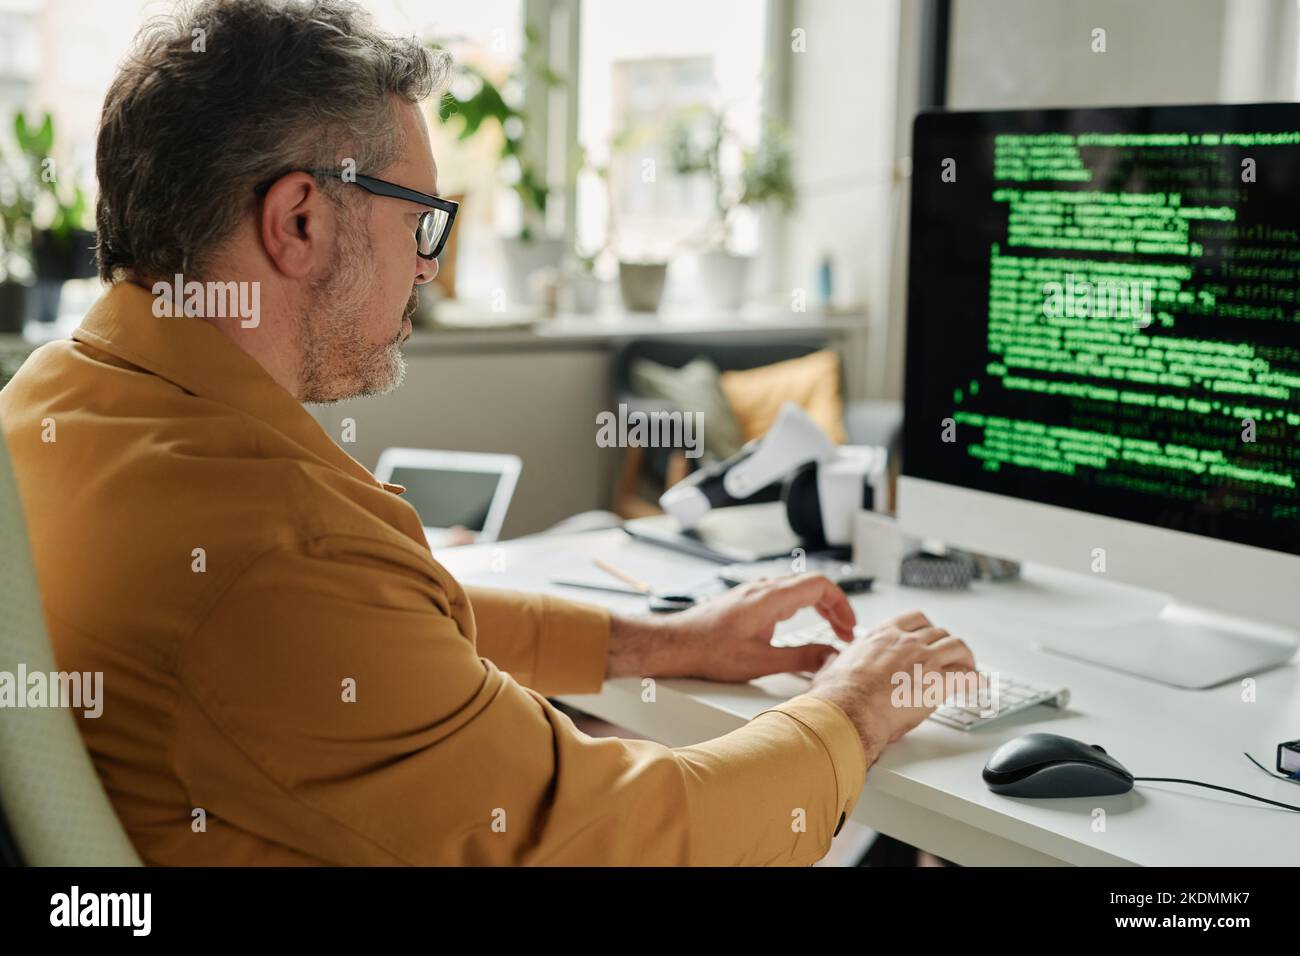 Side view of mature serious male IT engineer typing on computer keyboard while sitting in front of screen with coded data Stock Photo